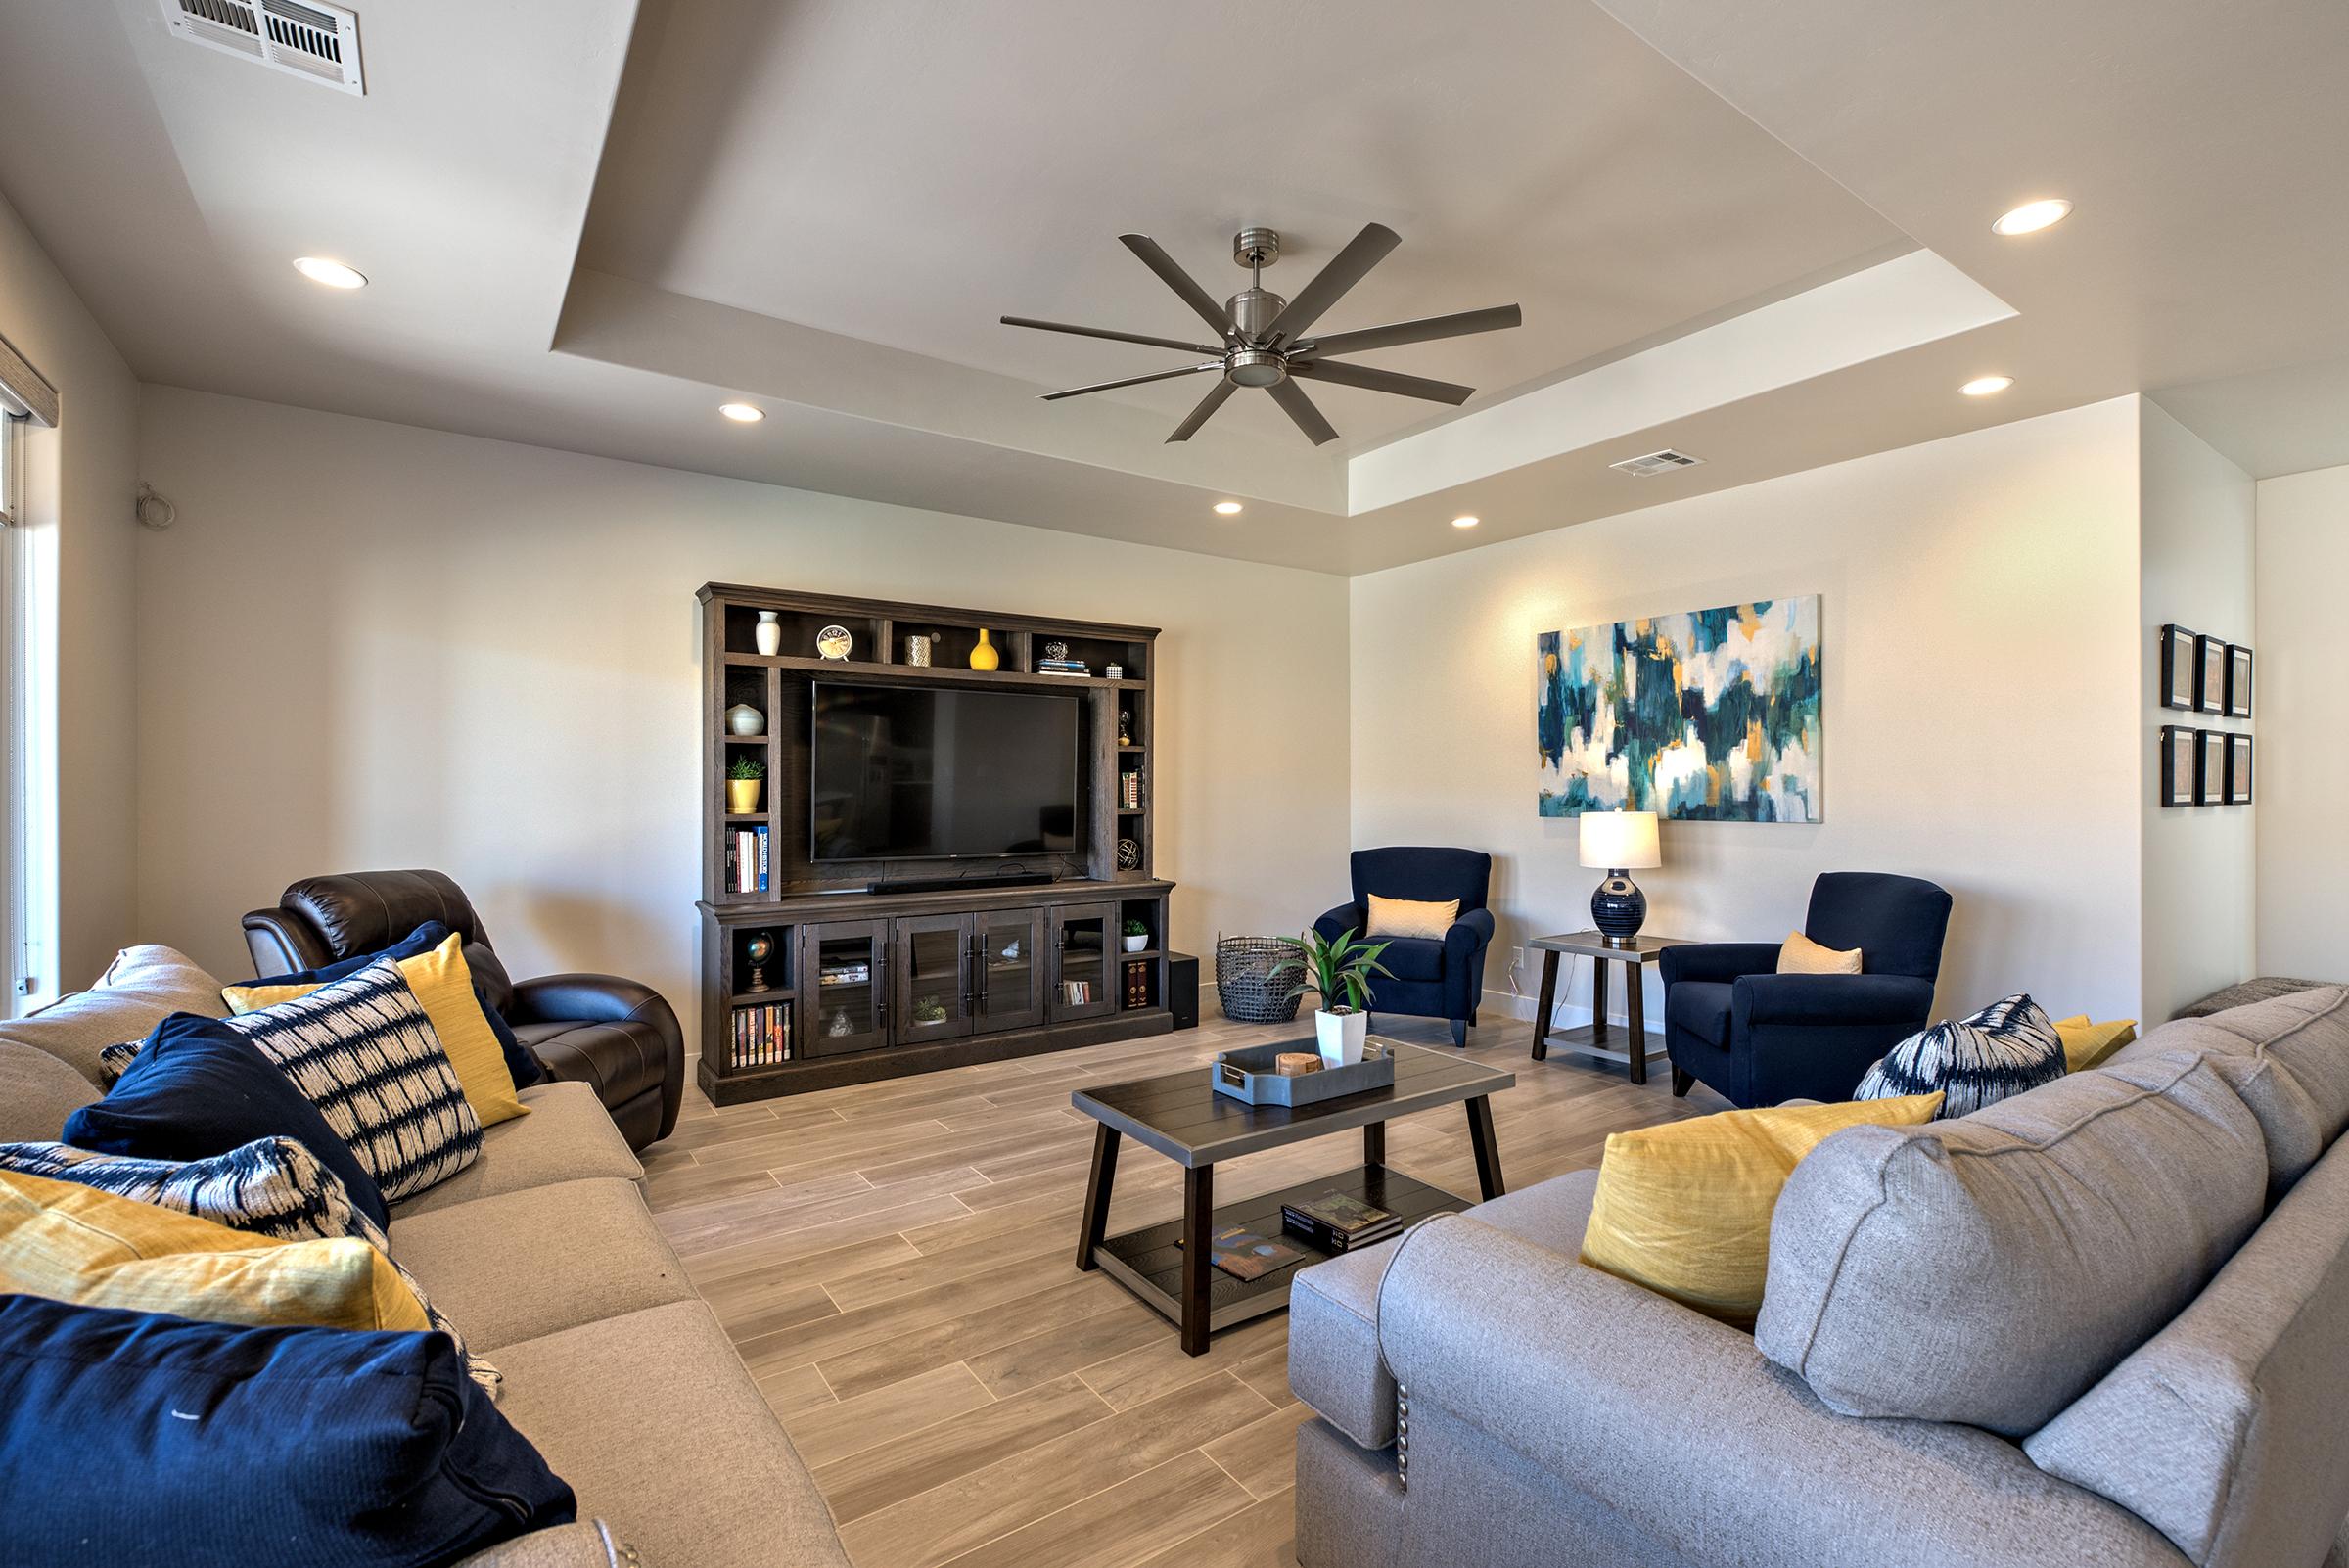 The Living Room is located adjacent to the dining room and is the perfect place to relax and watch your favorite movie or TV program.